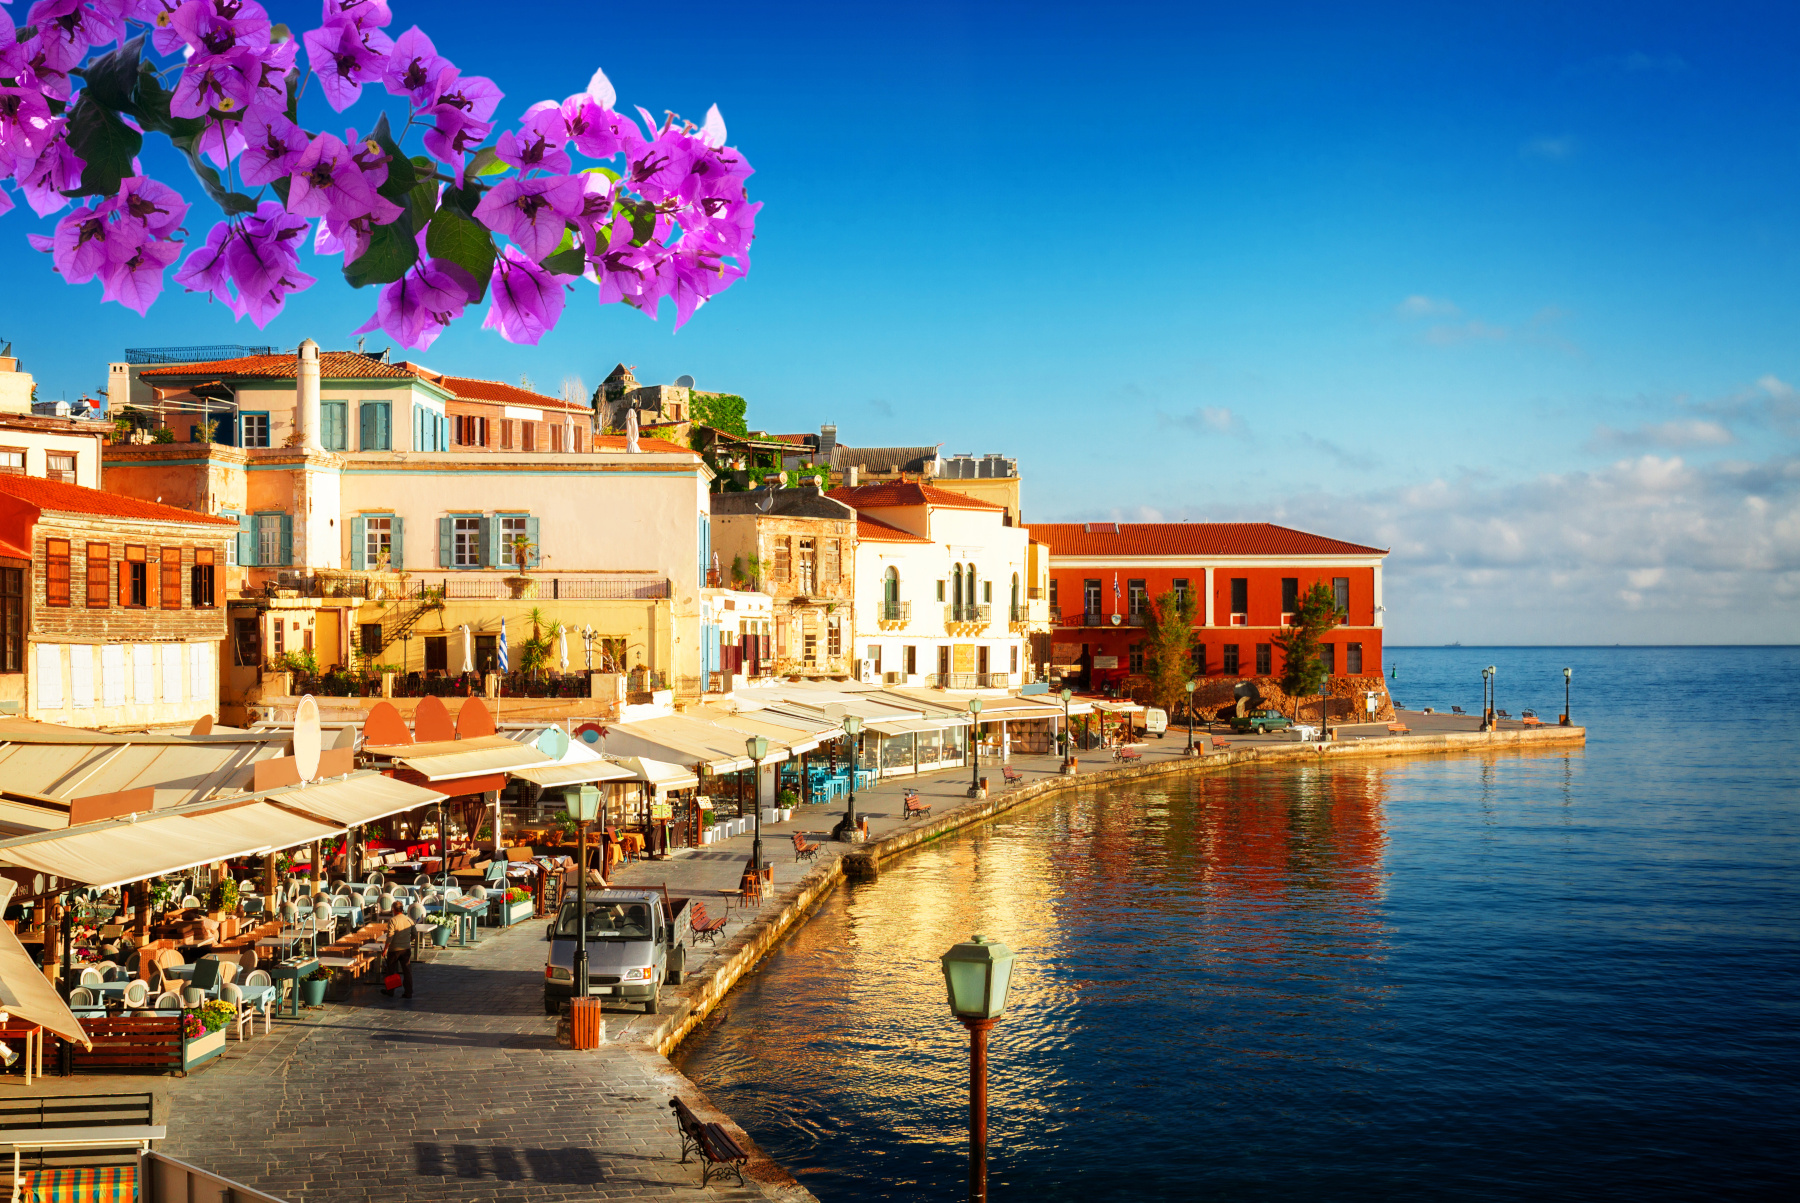 the harbour of Chania in Crete Greece with the image of a bugambilia branch on the front